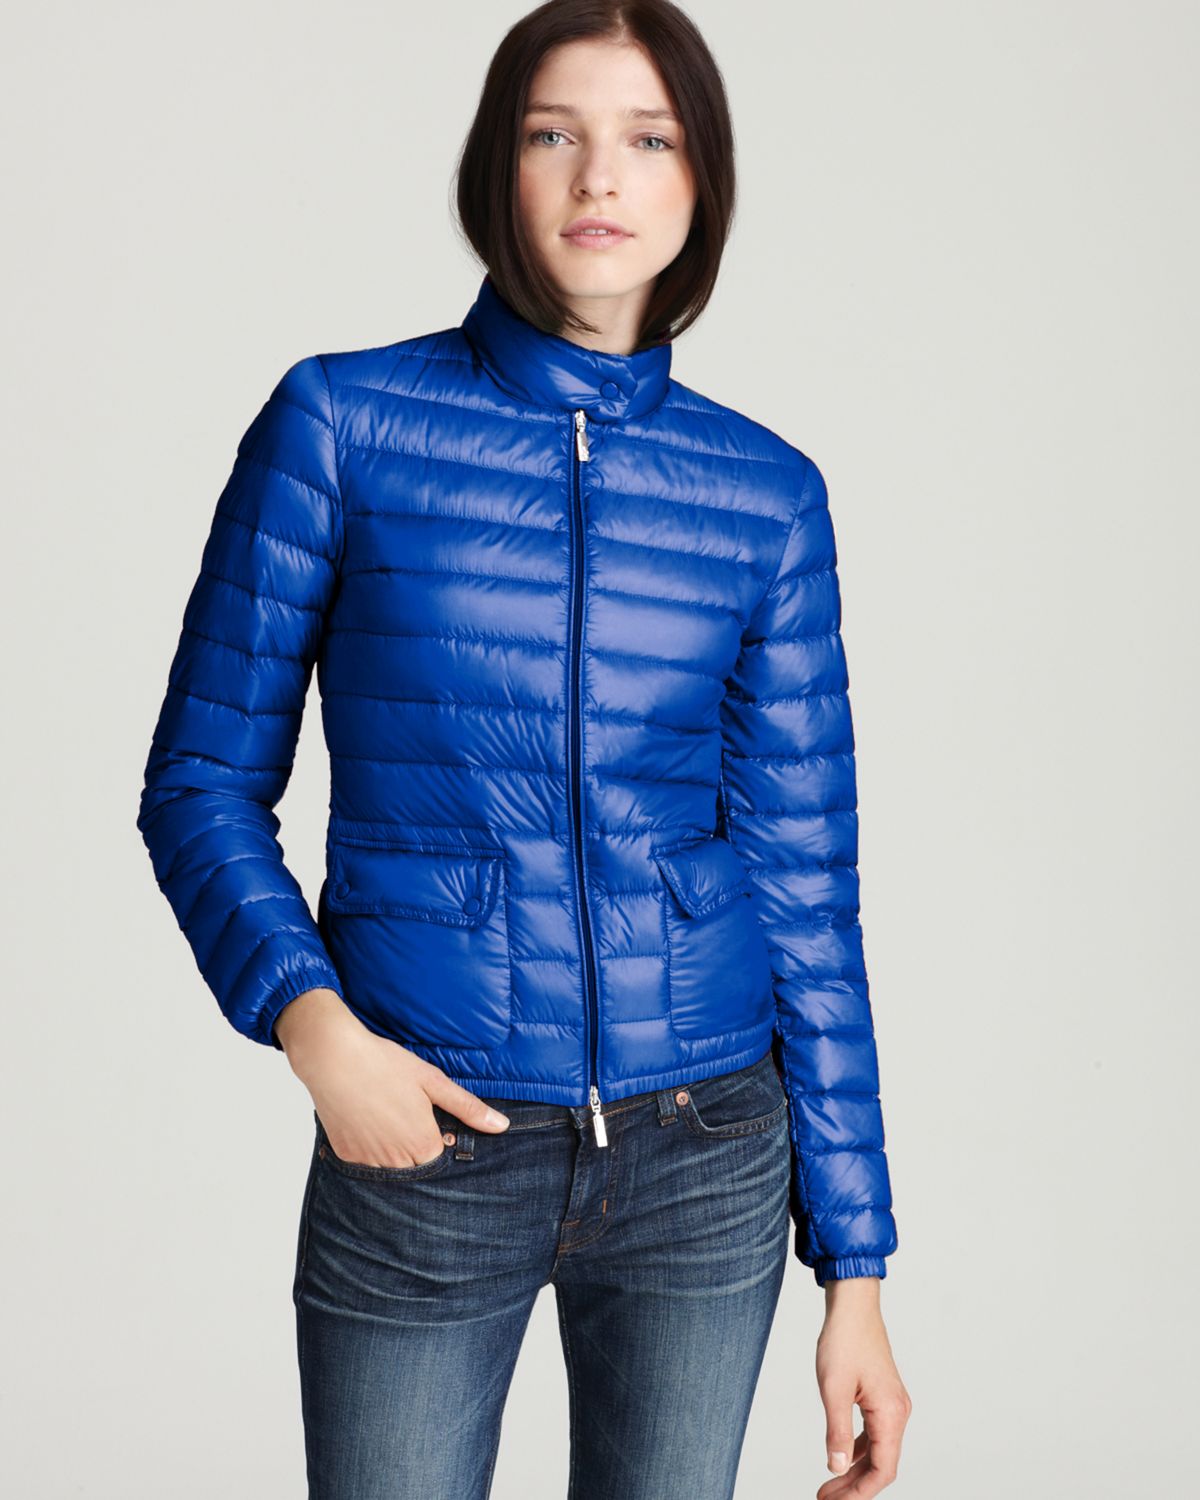 Moncler Lans Lightweight Down Jacket in Periwinkle (Blue) - Lyst